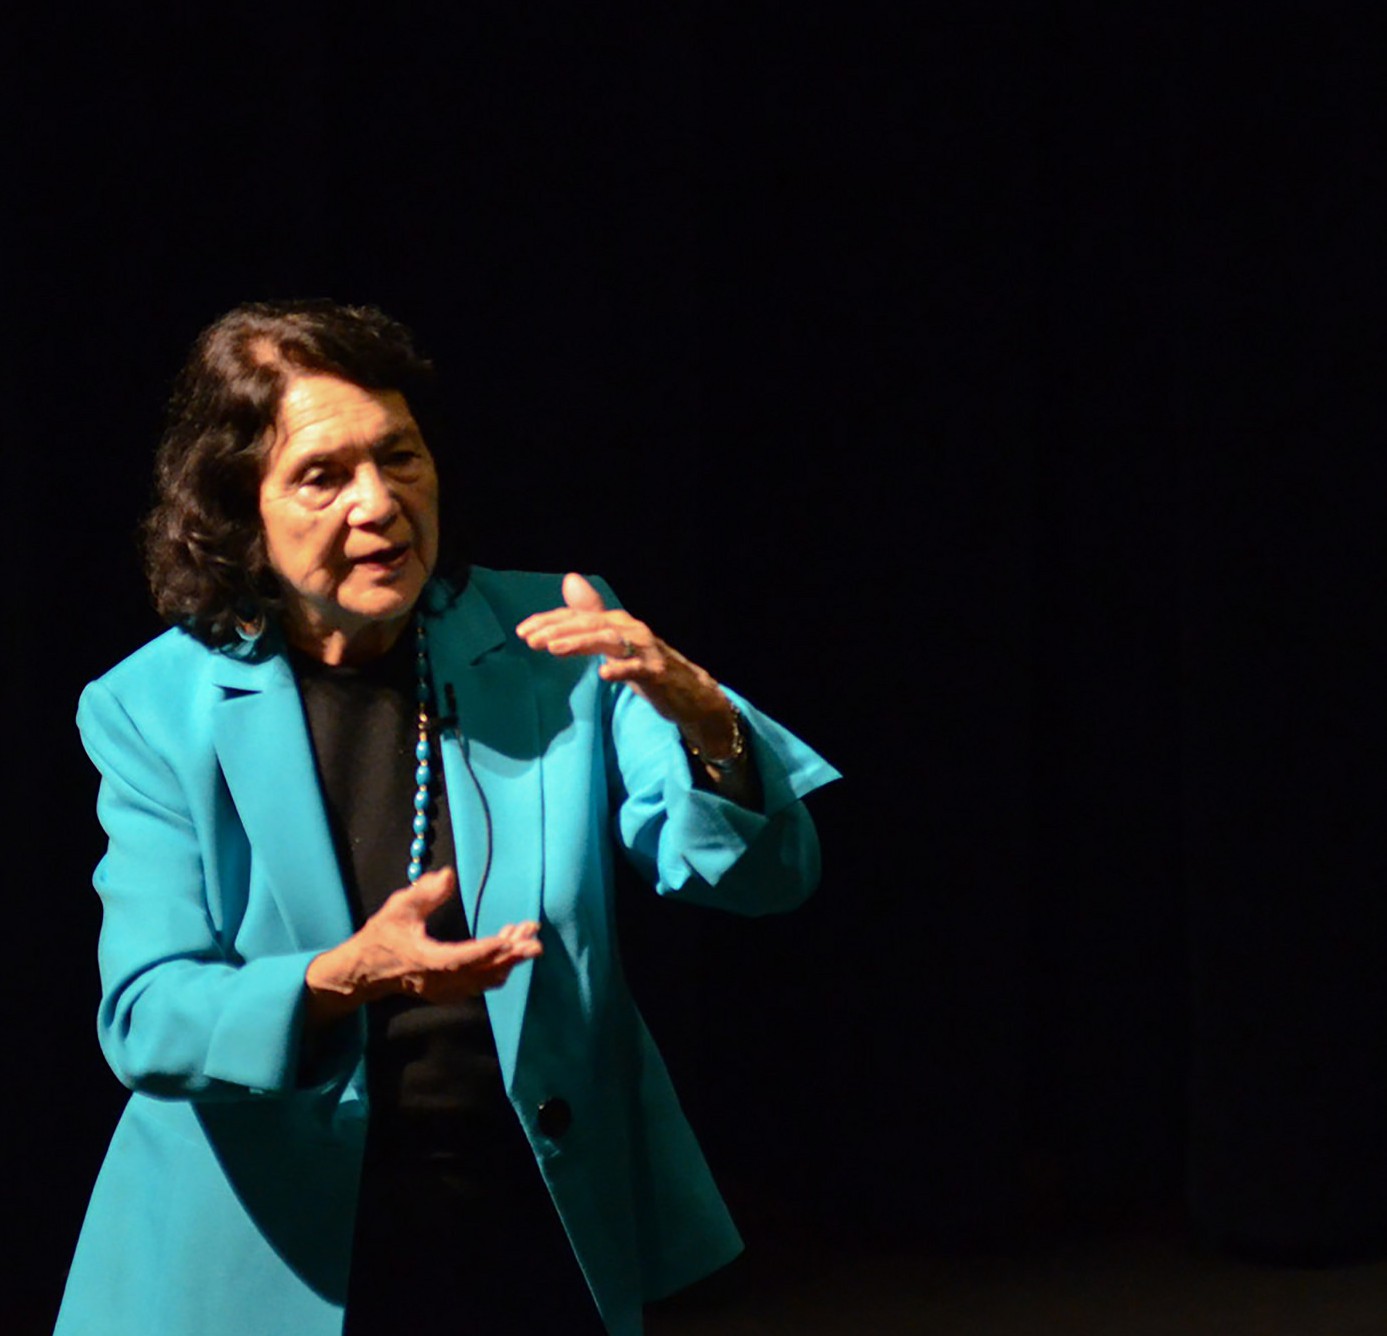 Labor leader and activist Dolores Huerta speaks to her audience about "correcting economic injustice" through her talk, Achieving Equity through Education that was held on campus in the Howard Brubeck Theatre on March 8. Tracy Grassel/The Telescope